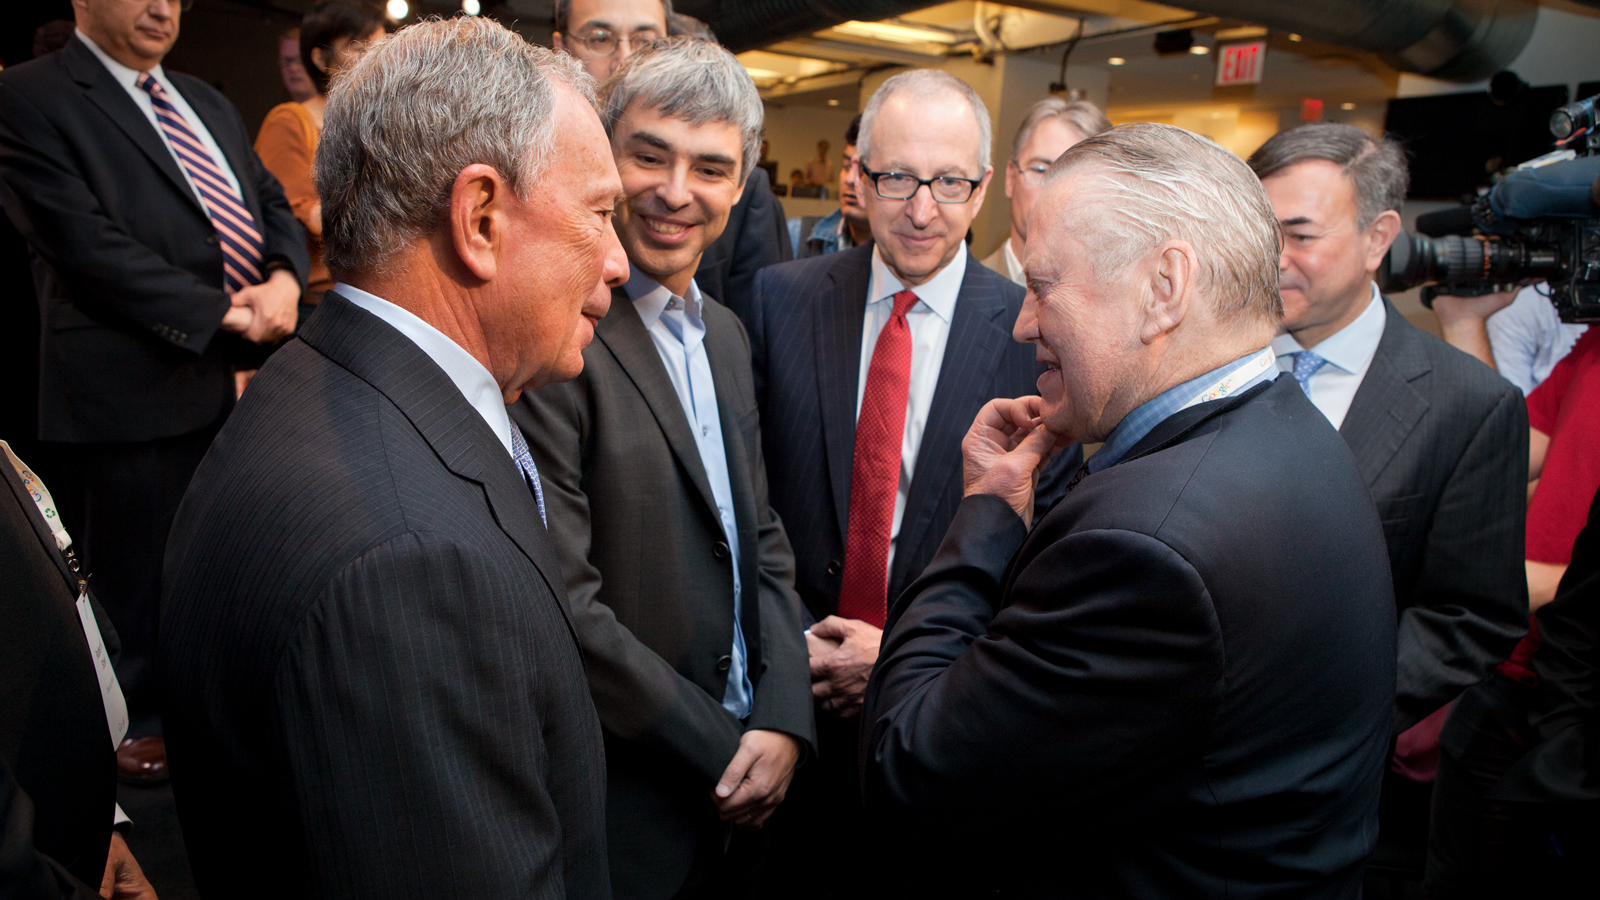 From left, then-New York City Mayor Michael Bloomberg, Google co-founder and CEO Larry Page, then-Cornell President David Skorton, Feeney and Robert Harrison ’76, then-chairman of the Cornell Board of Trustees, at a May 2012 press conference about Cornell Tech